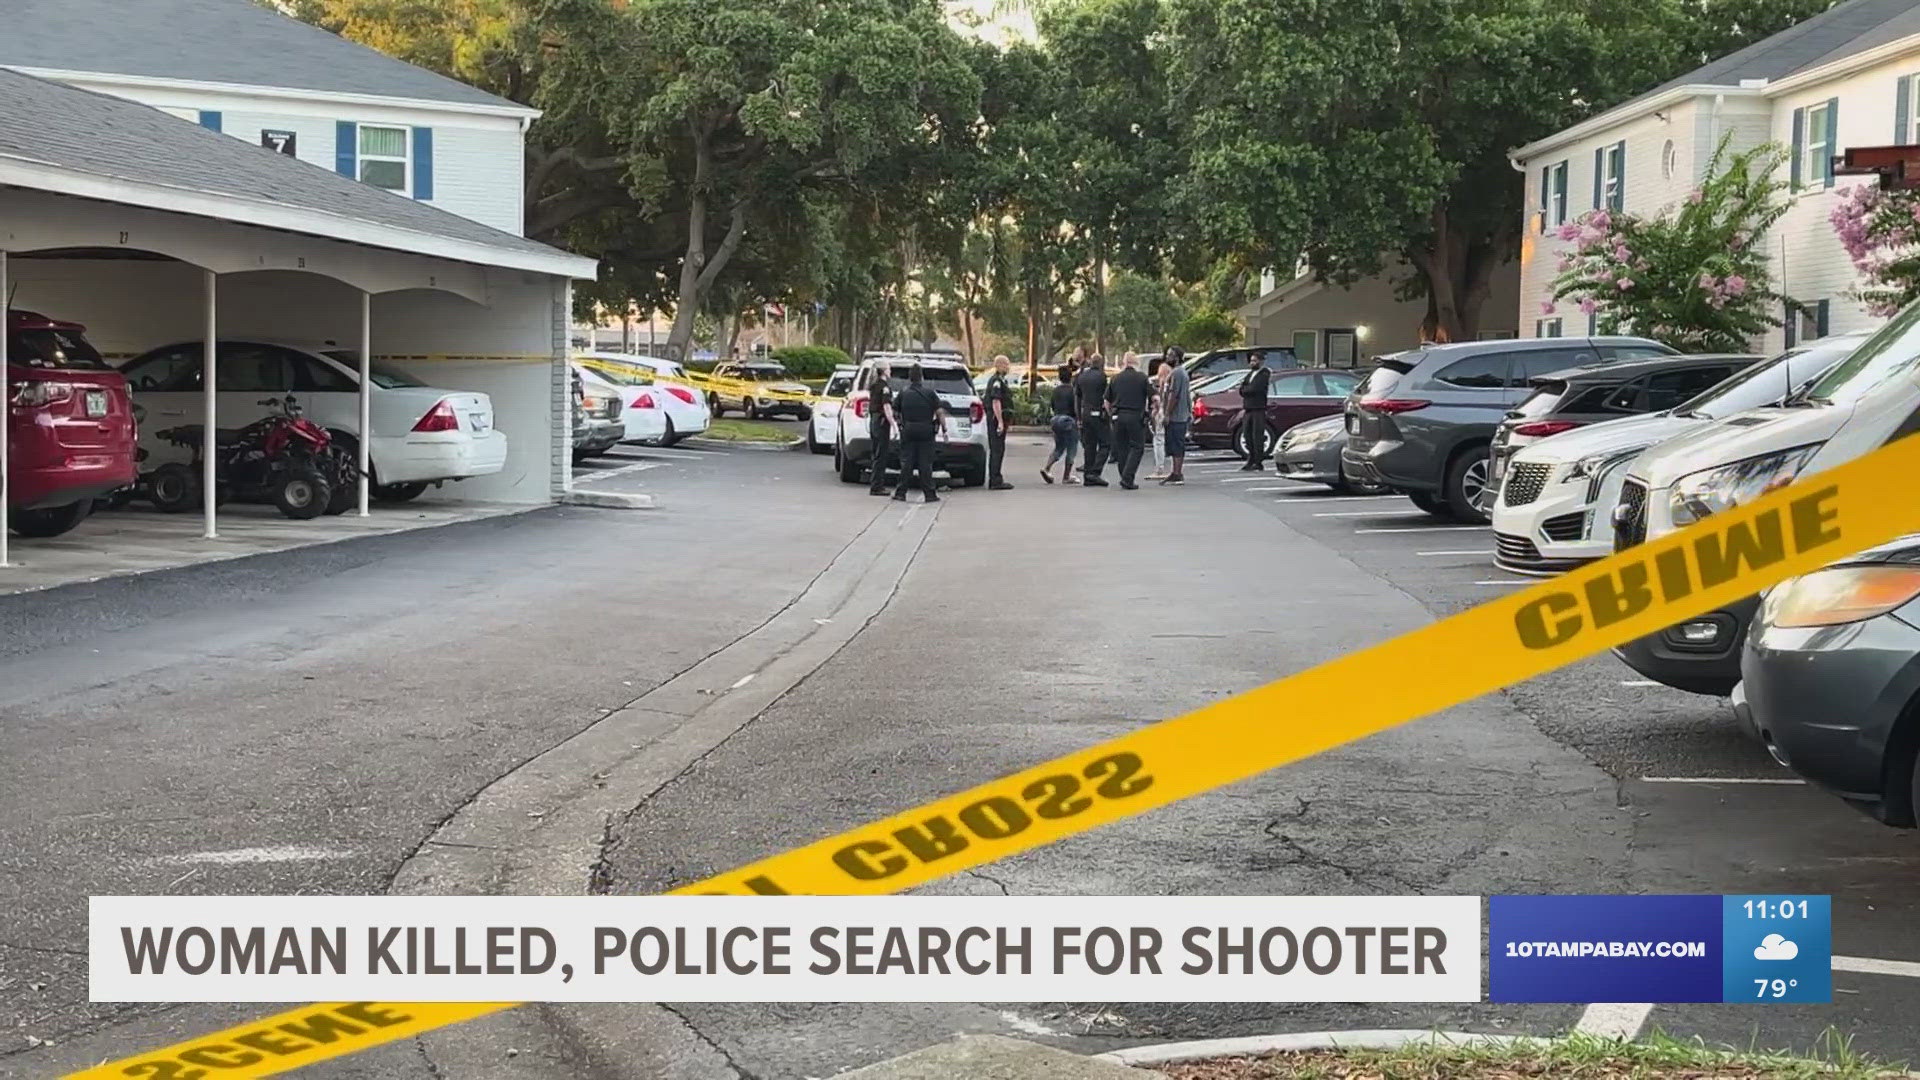 A 25-year-old woman died after she was shot Tuesday morning at an apartment complex, according to St. Petersburg police.